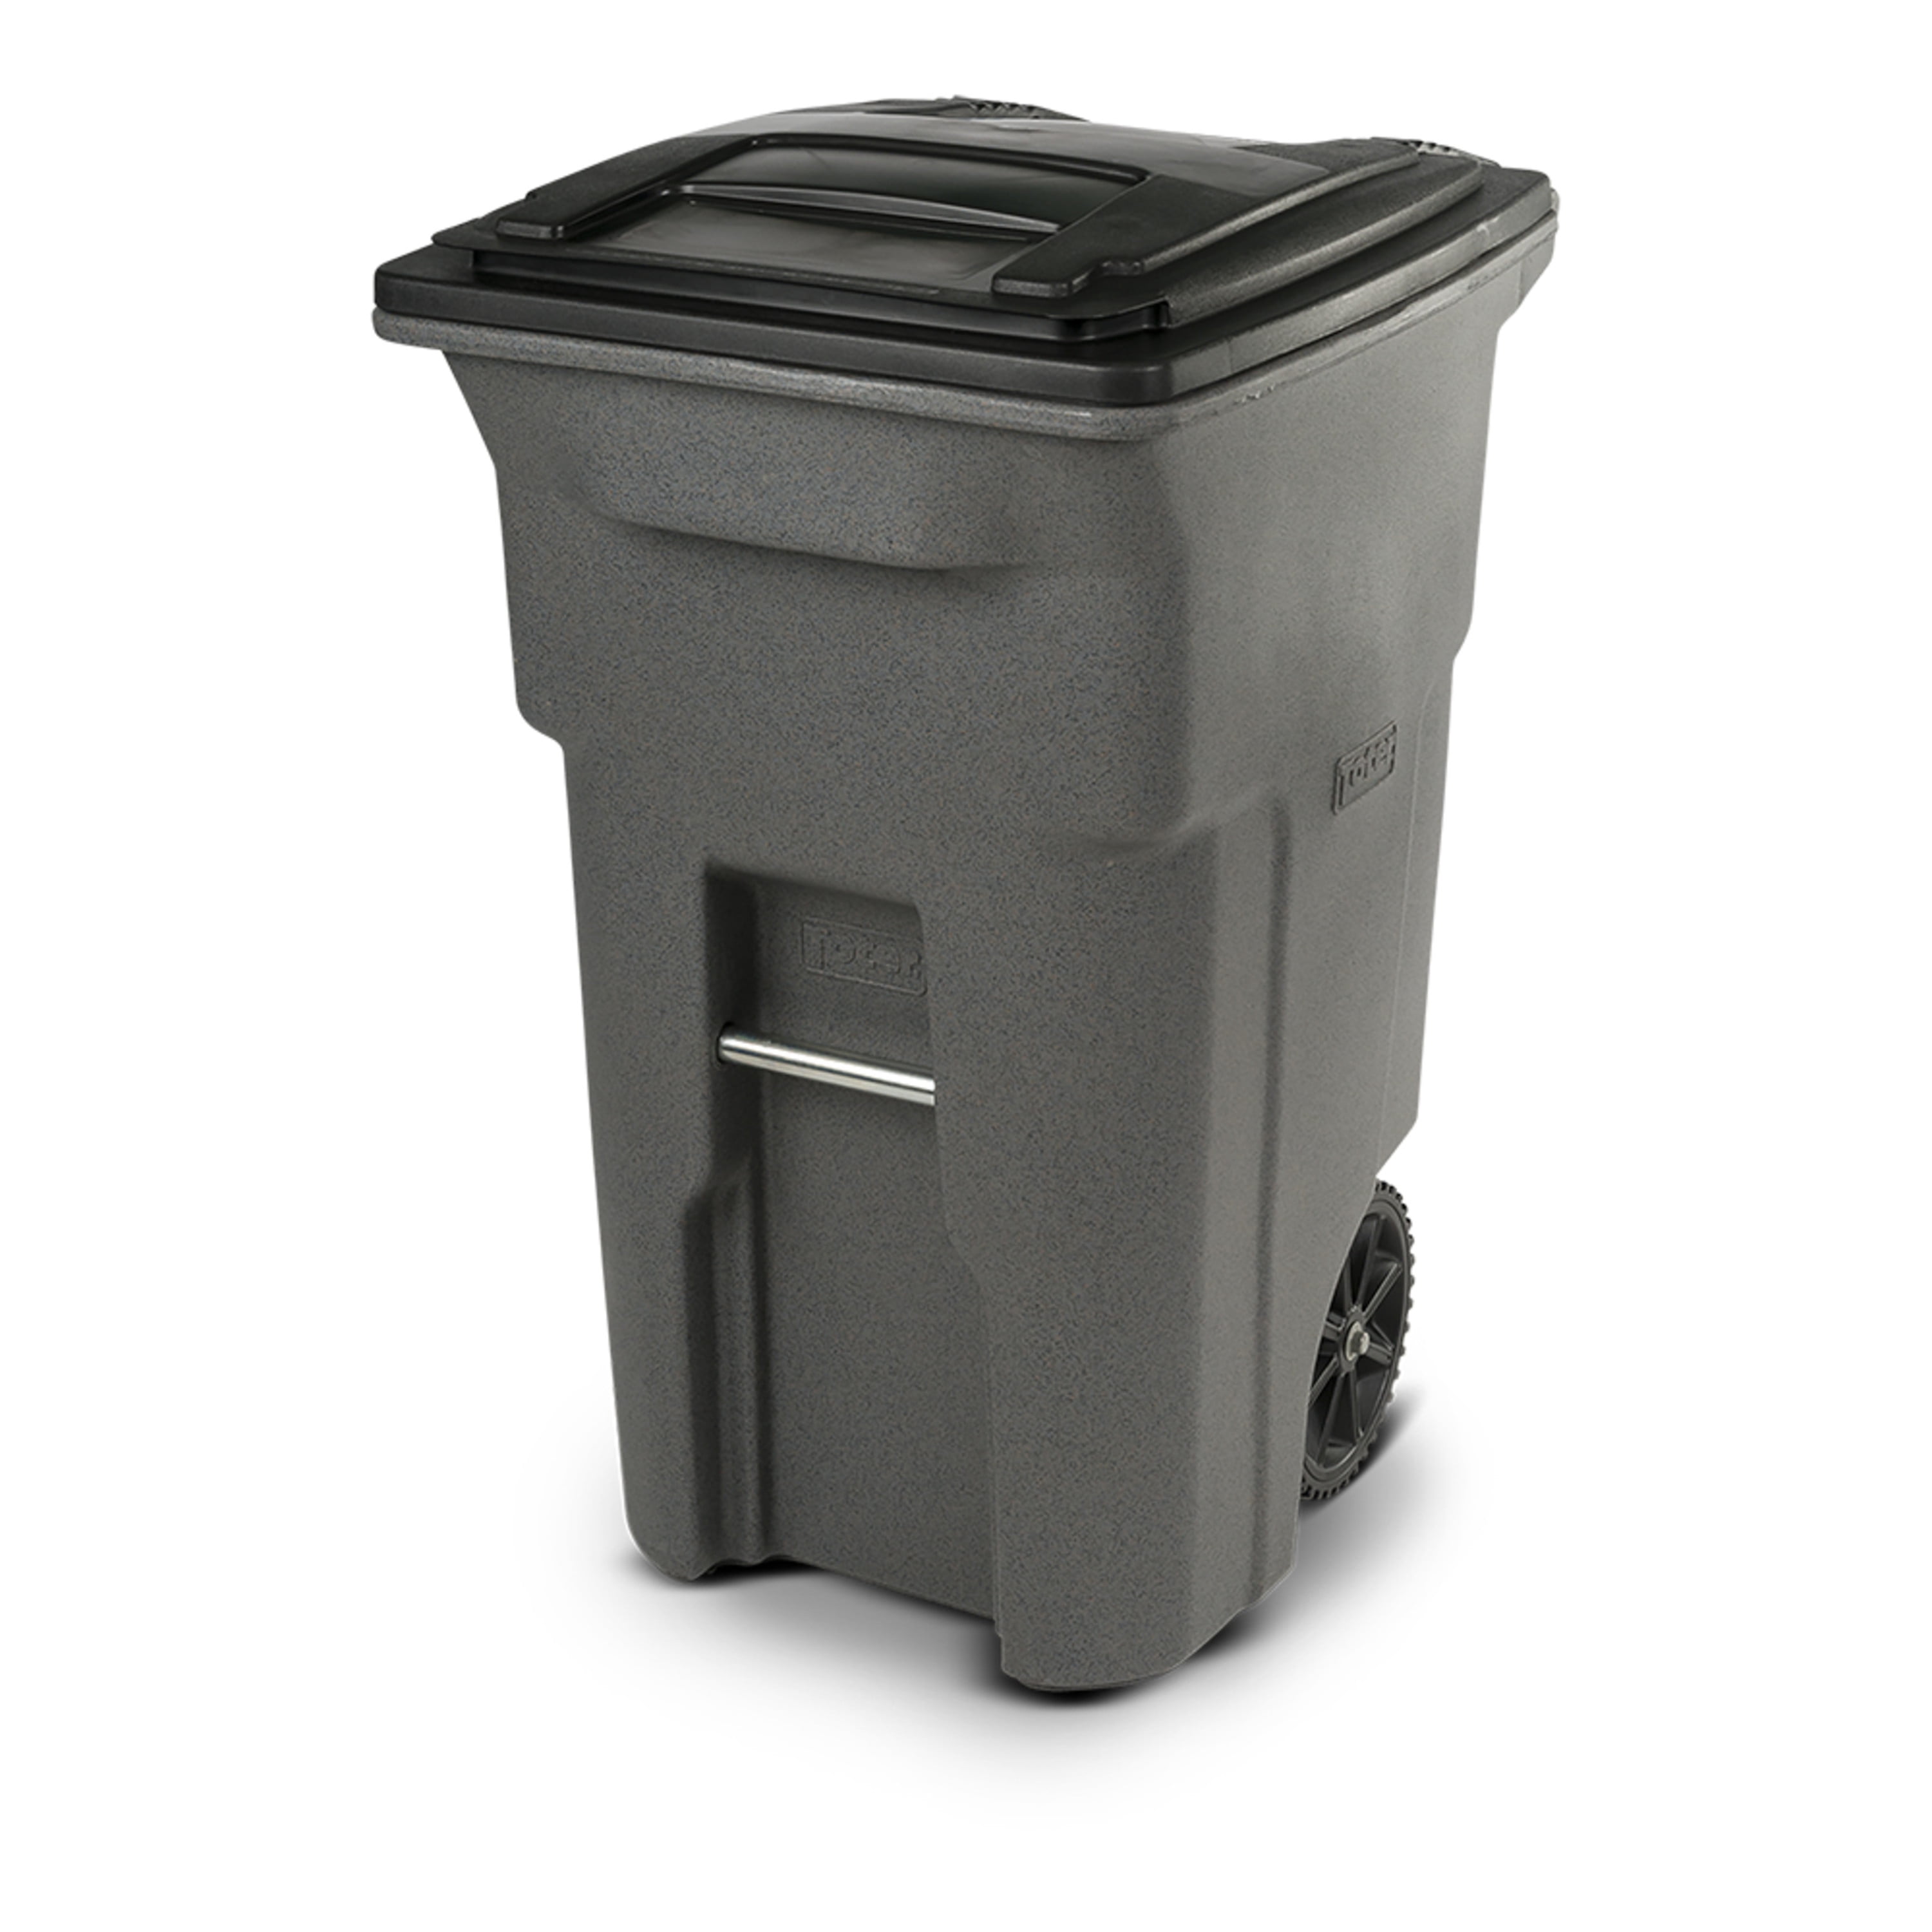 Toter 64 Gallon Trash Can Greenstone with Wheels and Lid 